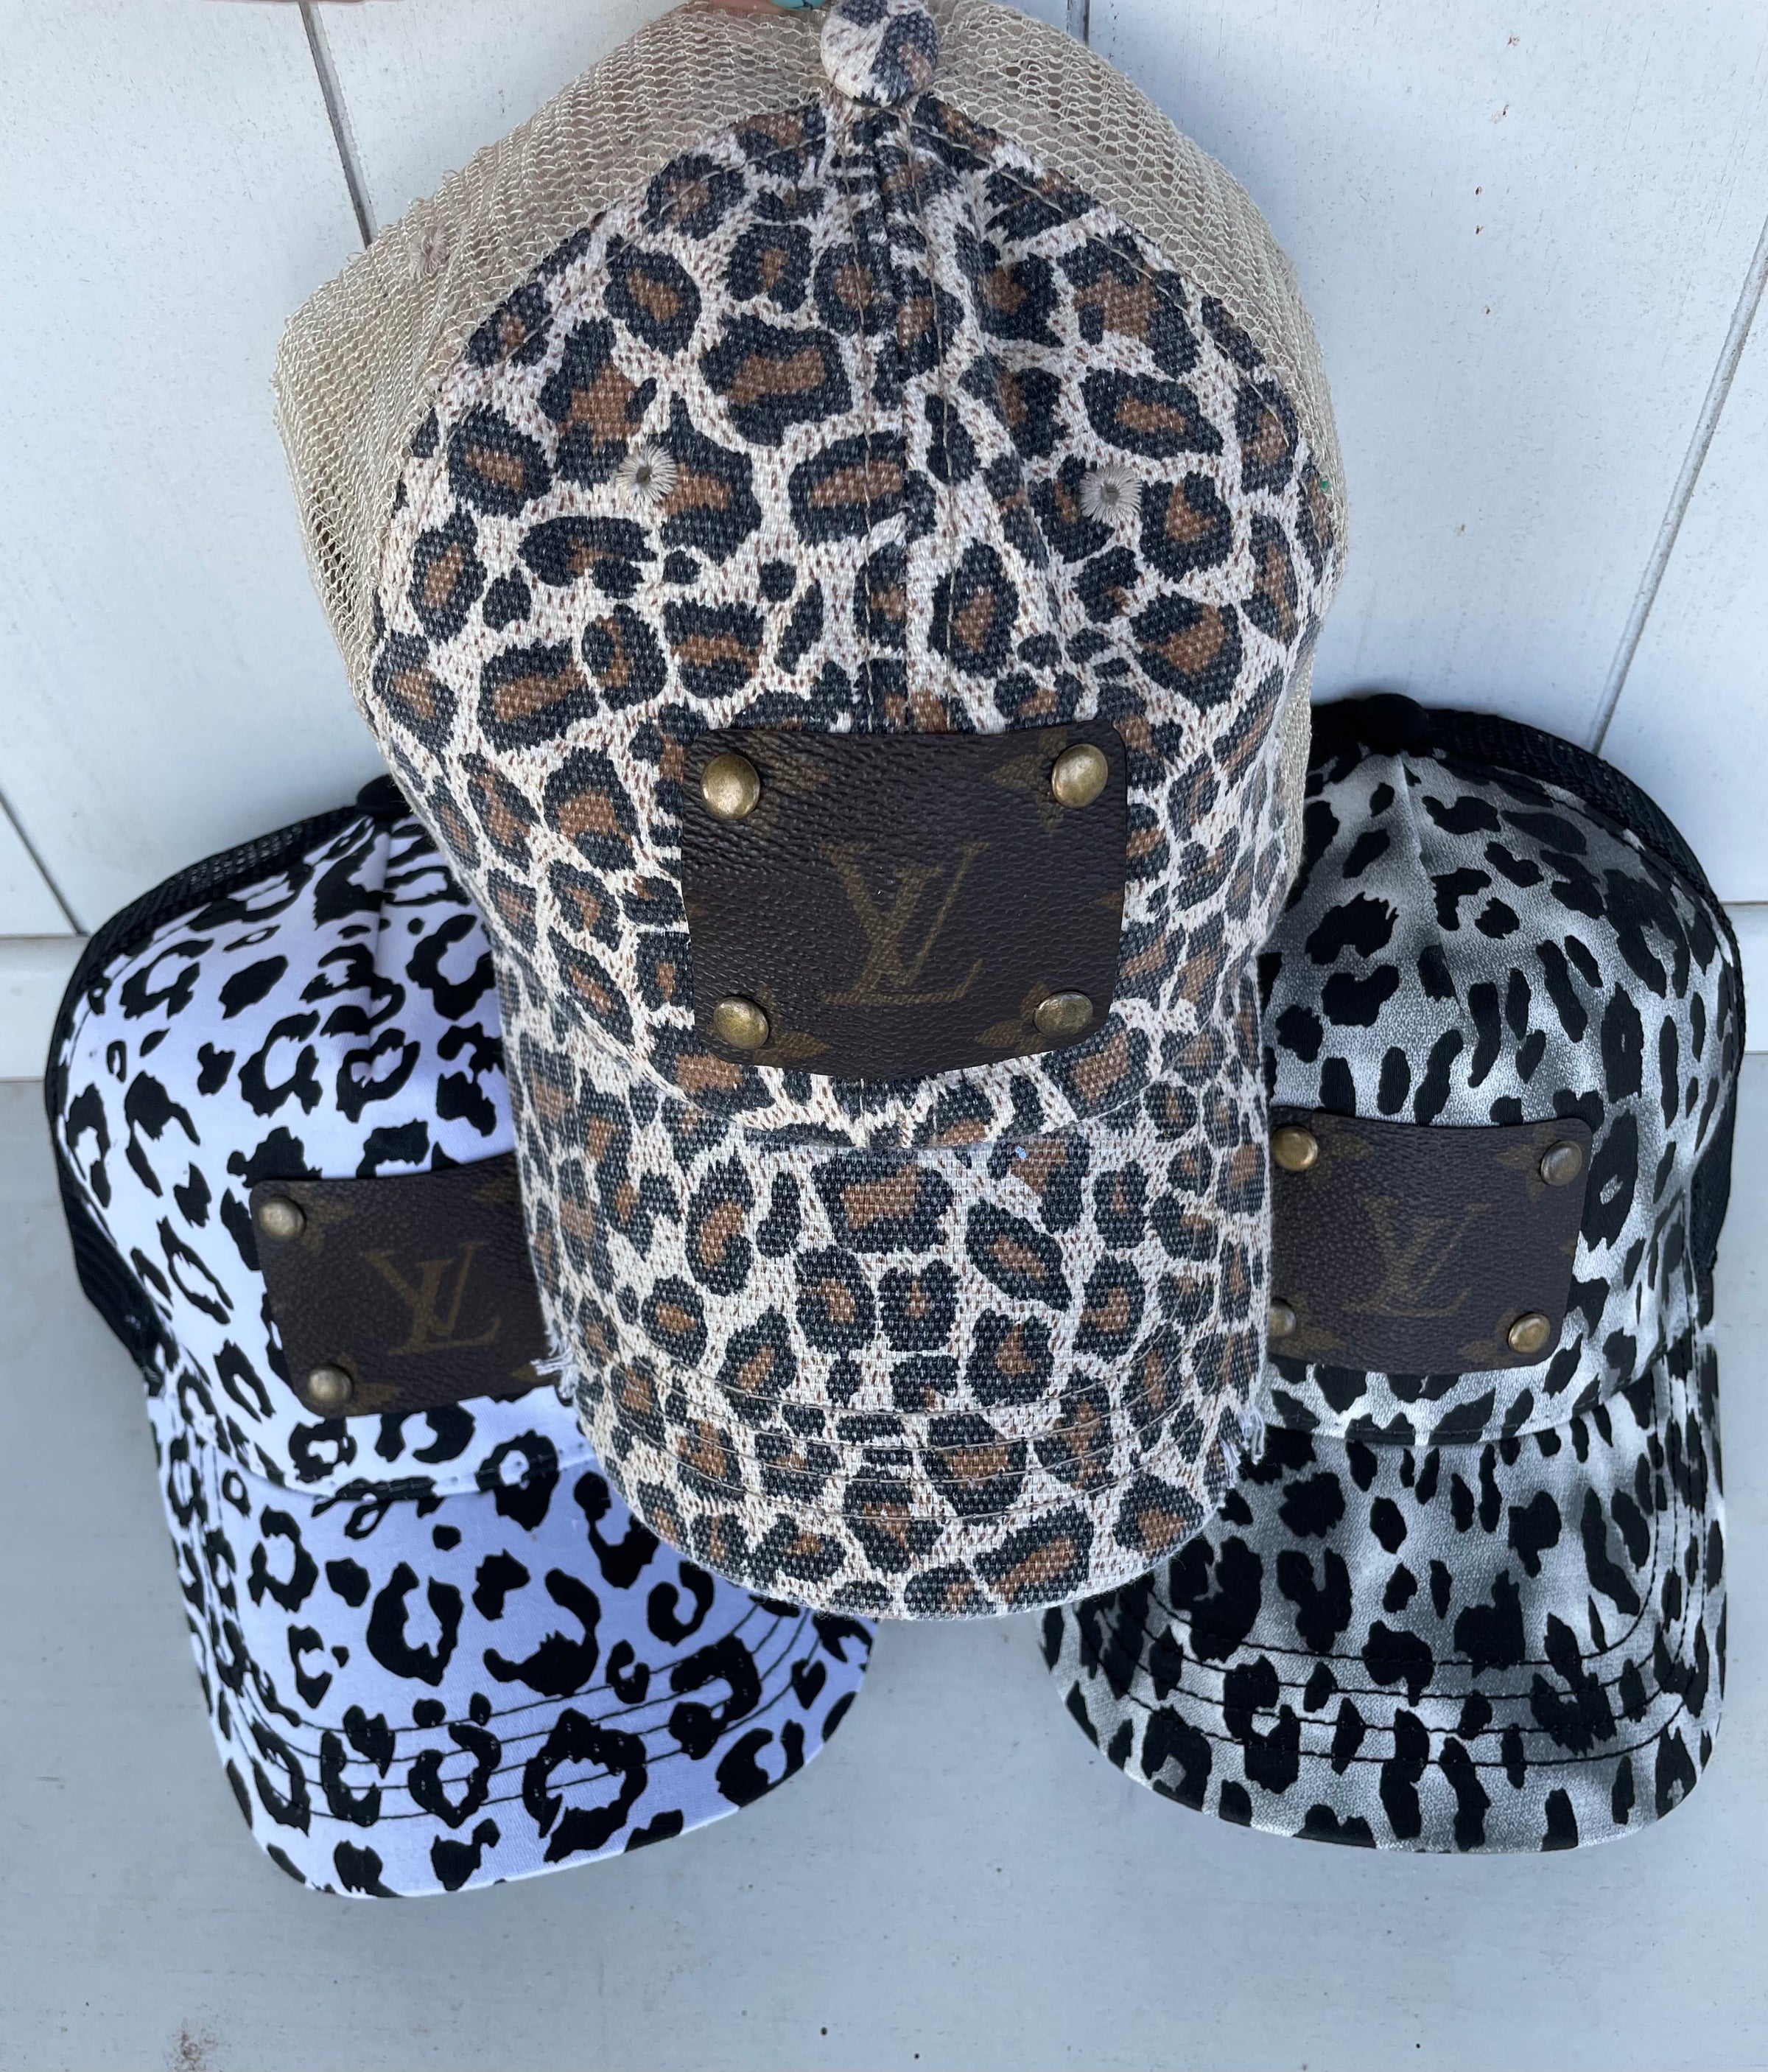 New hats from LV! I love the back of the hat! #louisvuitton #fallforyo